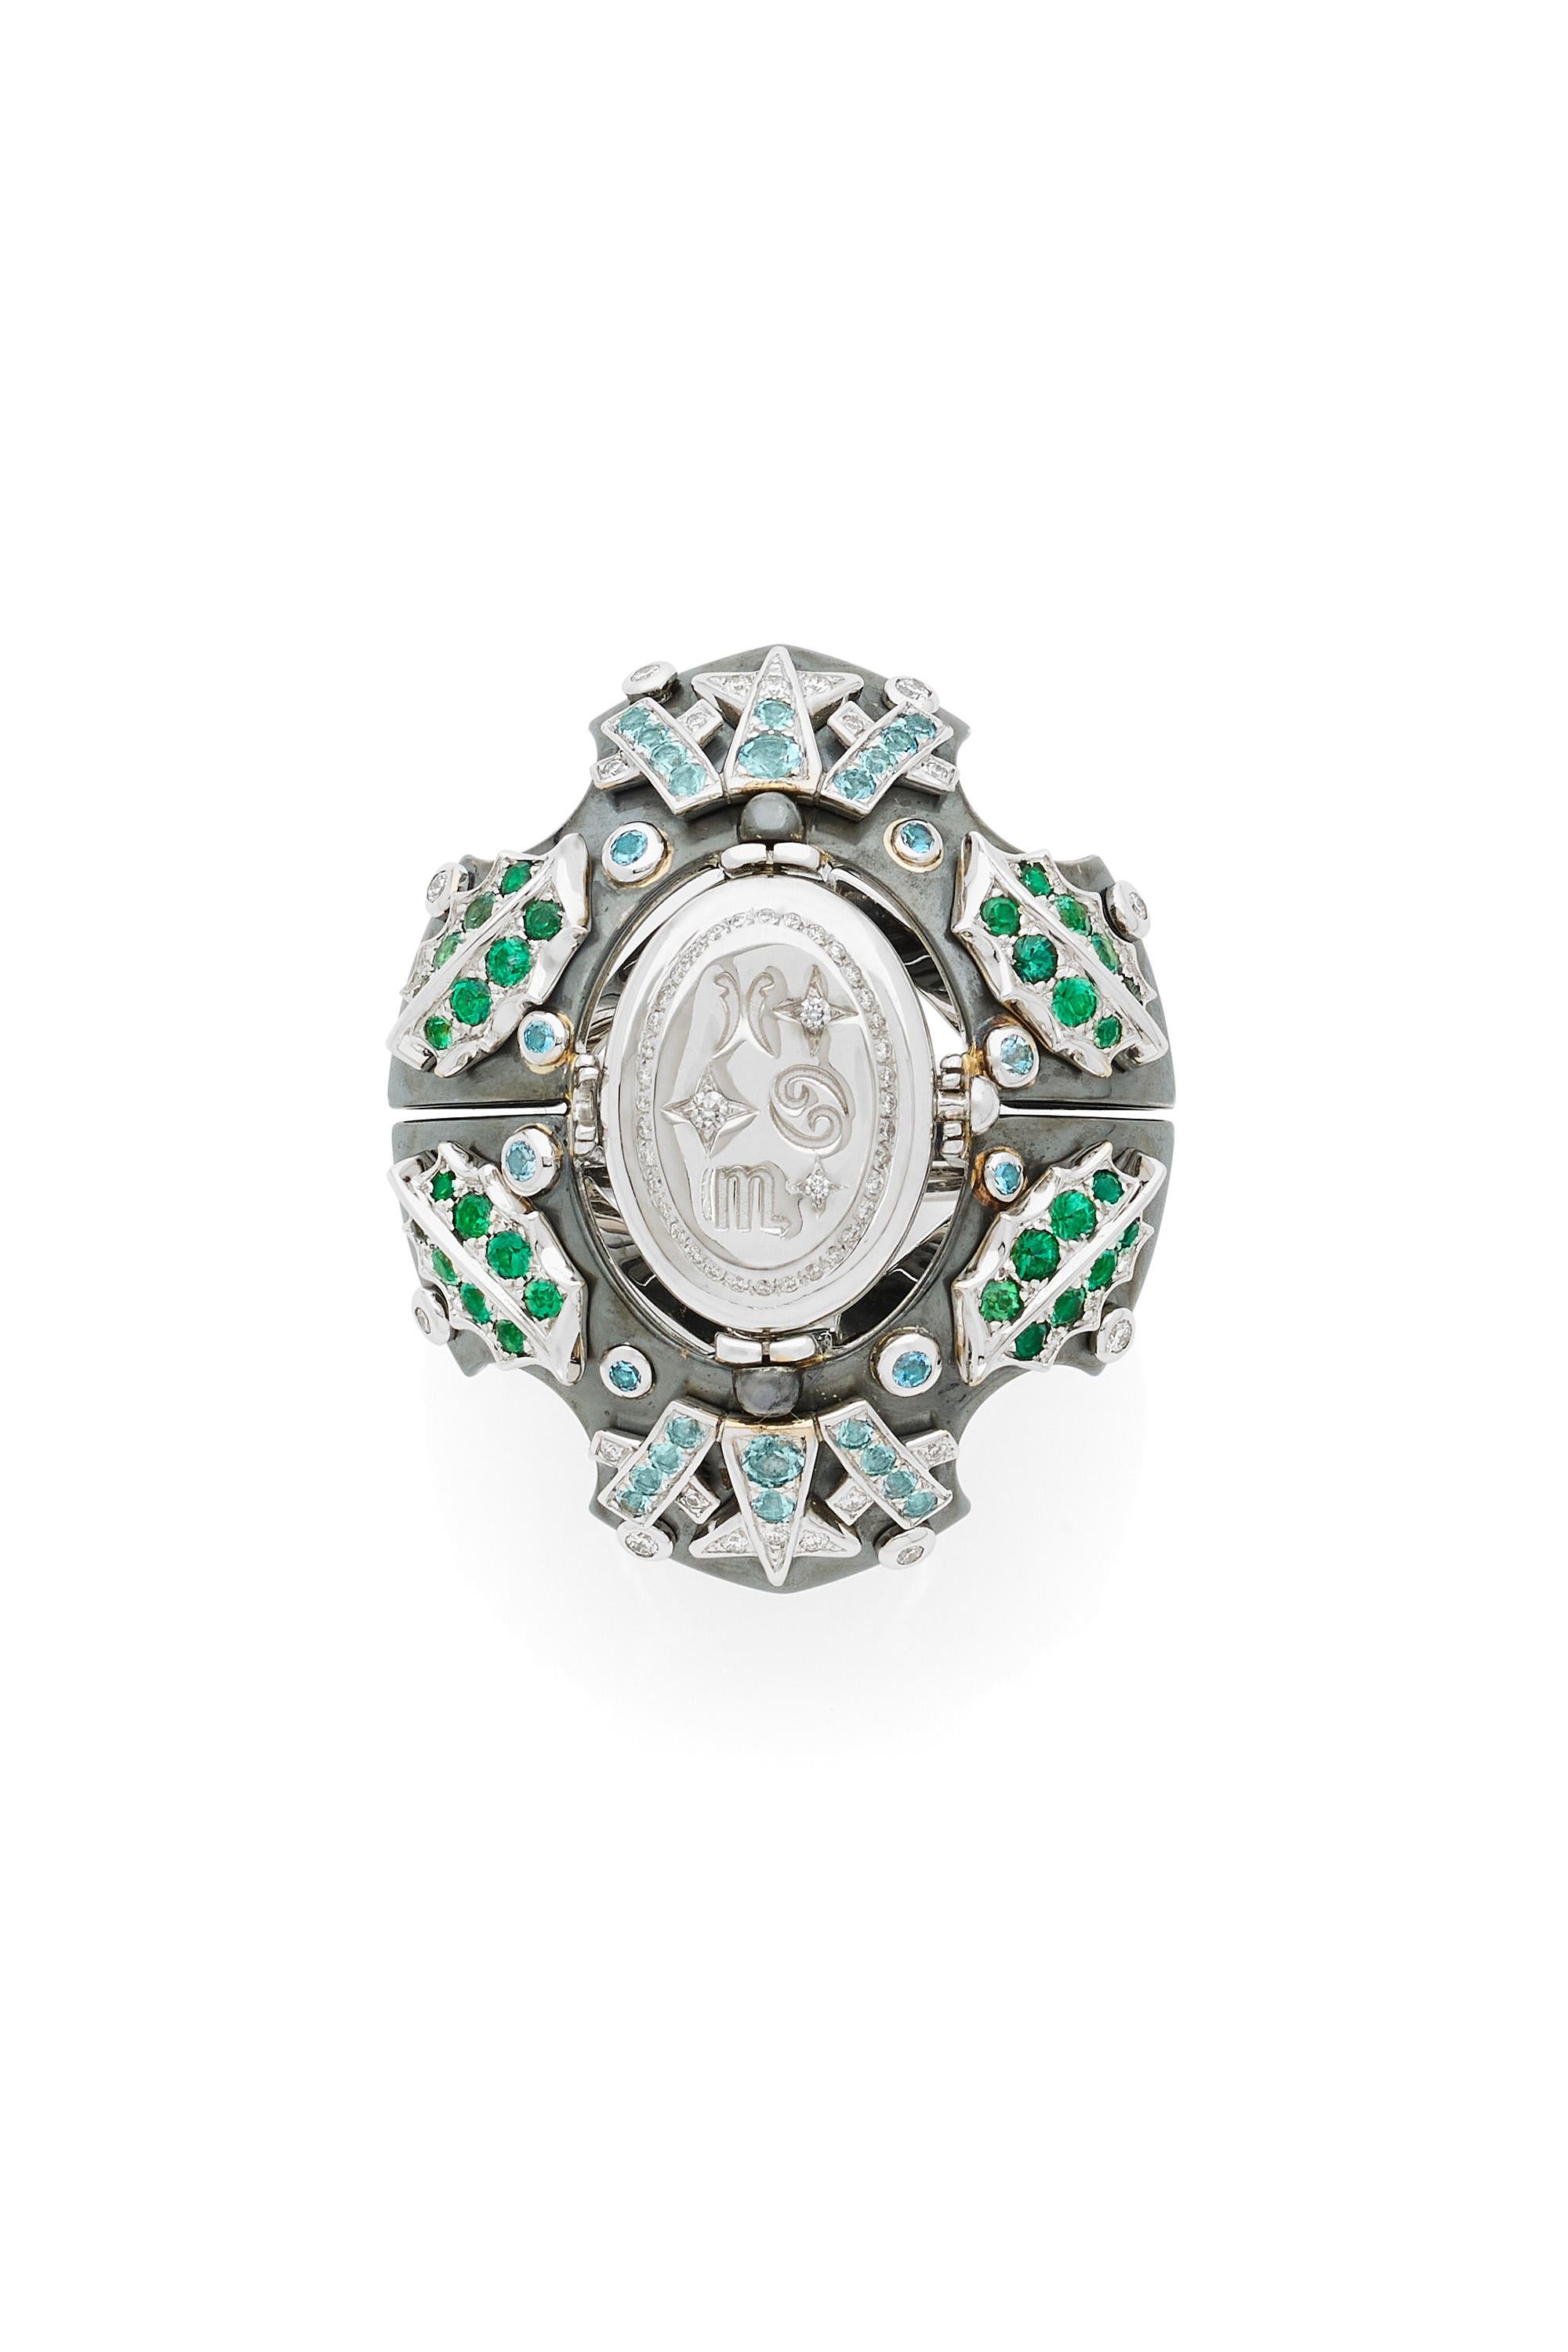 White gold and distressed silver ring.  Set with diamonds, yellow sapphires, garnets, and tsavorites. Rotating medallion: on the white gold are engraved zodiac signs and on  the chalcedony, a green tourmaline.

Details:
Chalcedony
Yellow Sapphires,